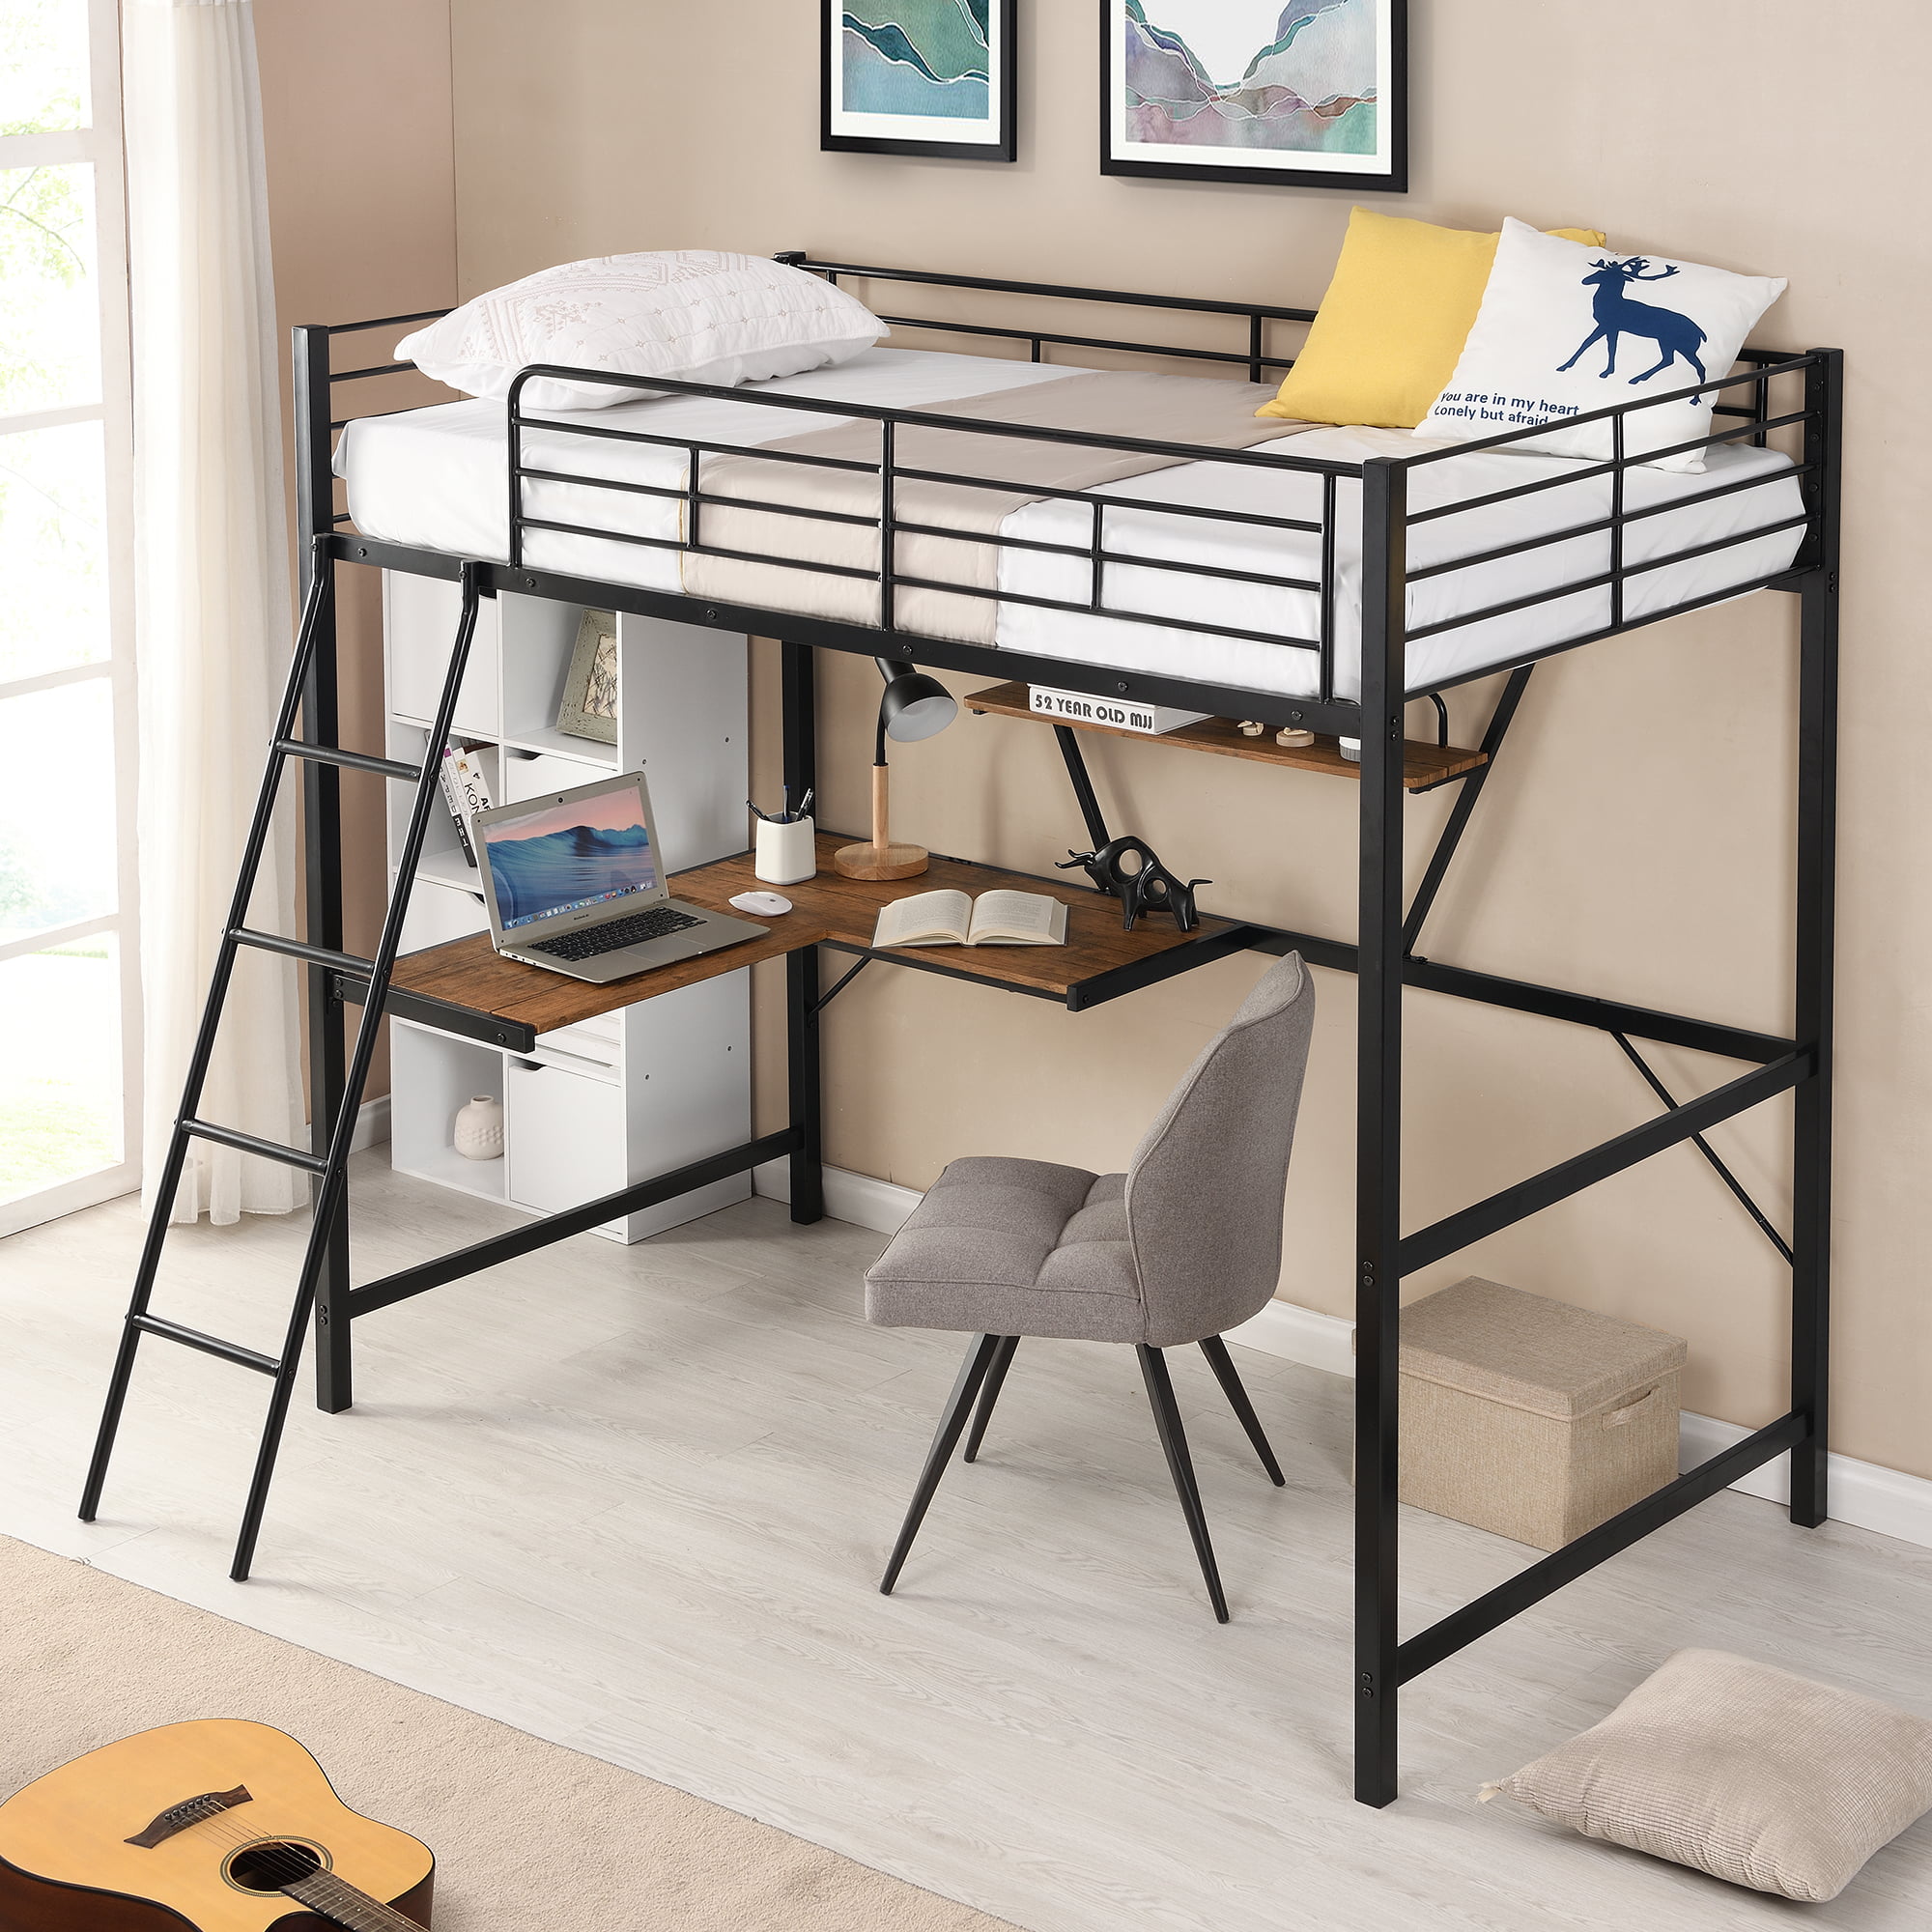 Metal Loft Bed With L Shaped Desk And, Metal Loft Bed With Desk Under